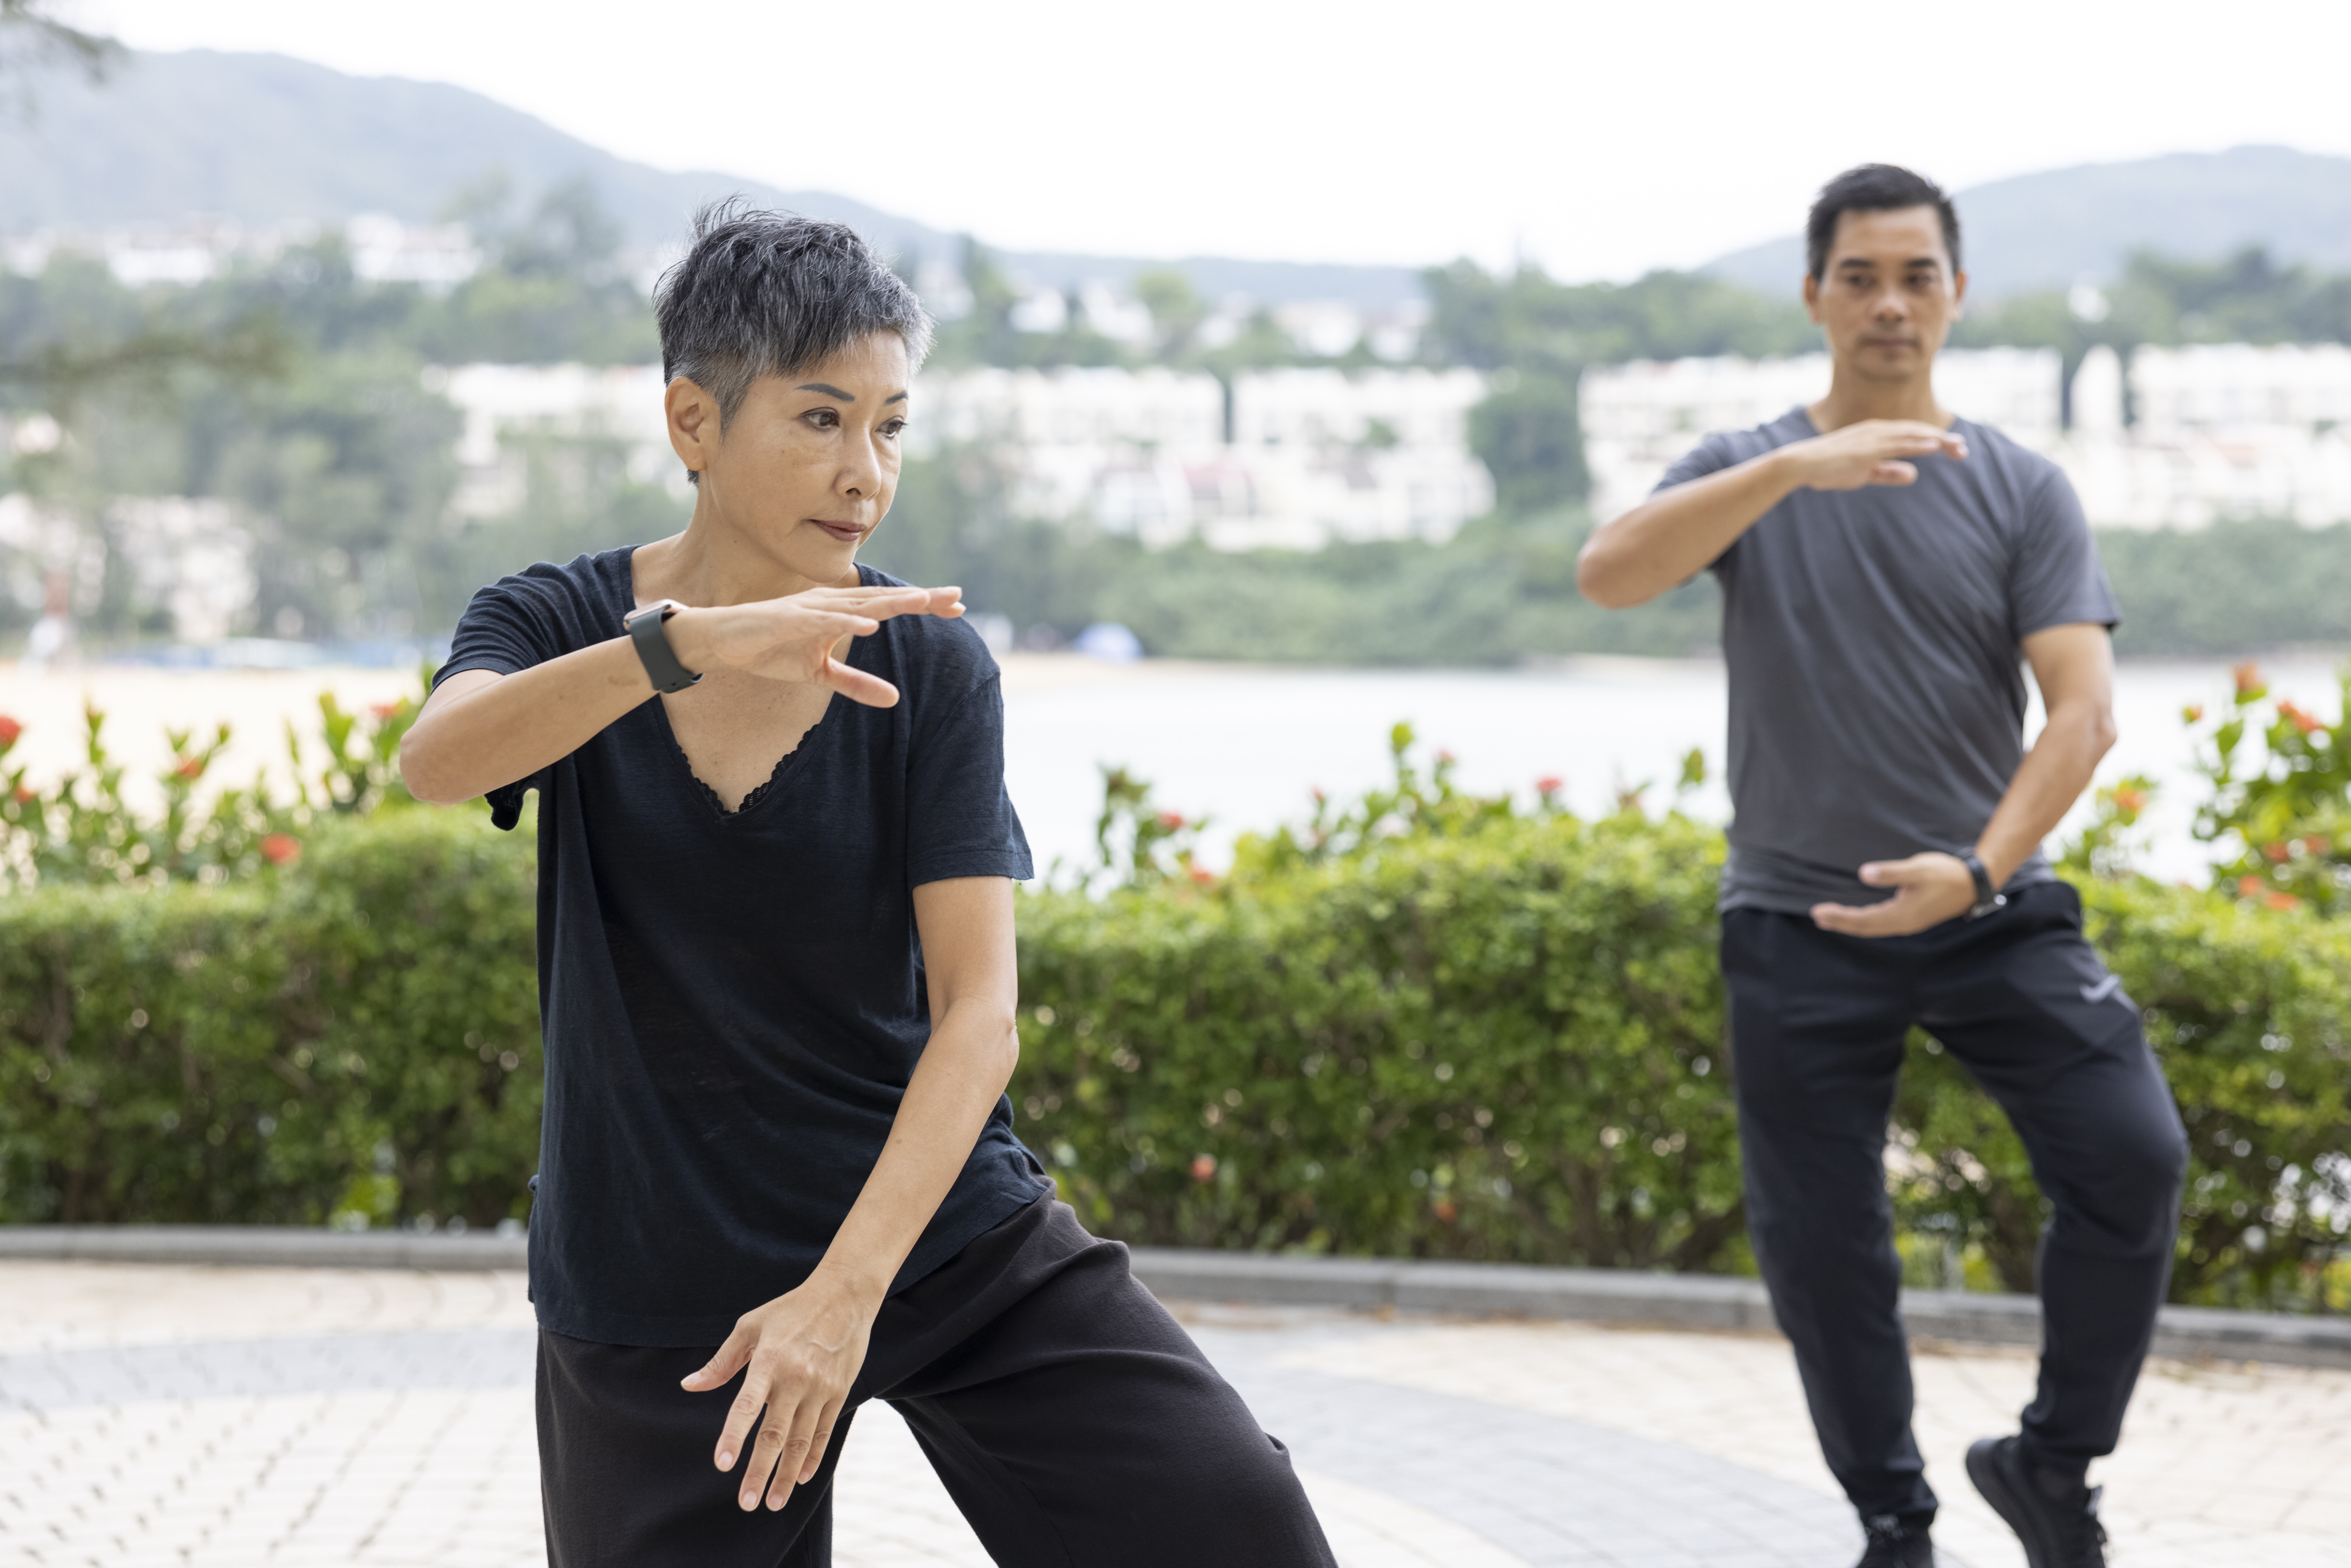 Coco Wong (left) has launched Hong Kong wellness and fitness start-up, 50+ Exercise Buddy, with her sister Zan. Photo: Man Tam